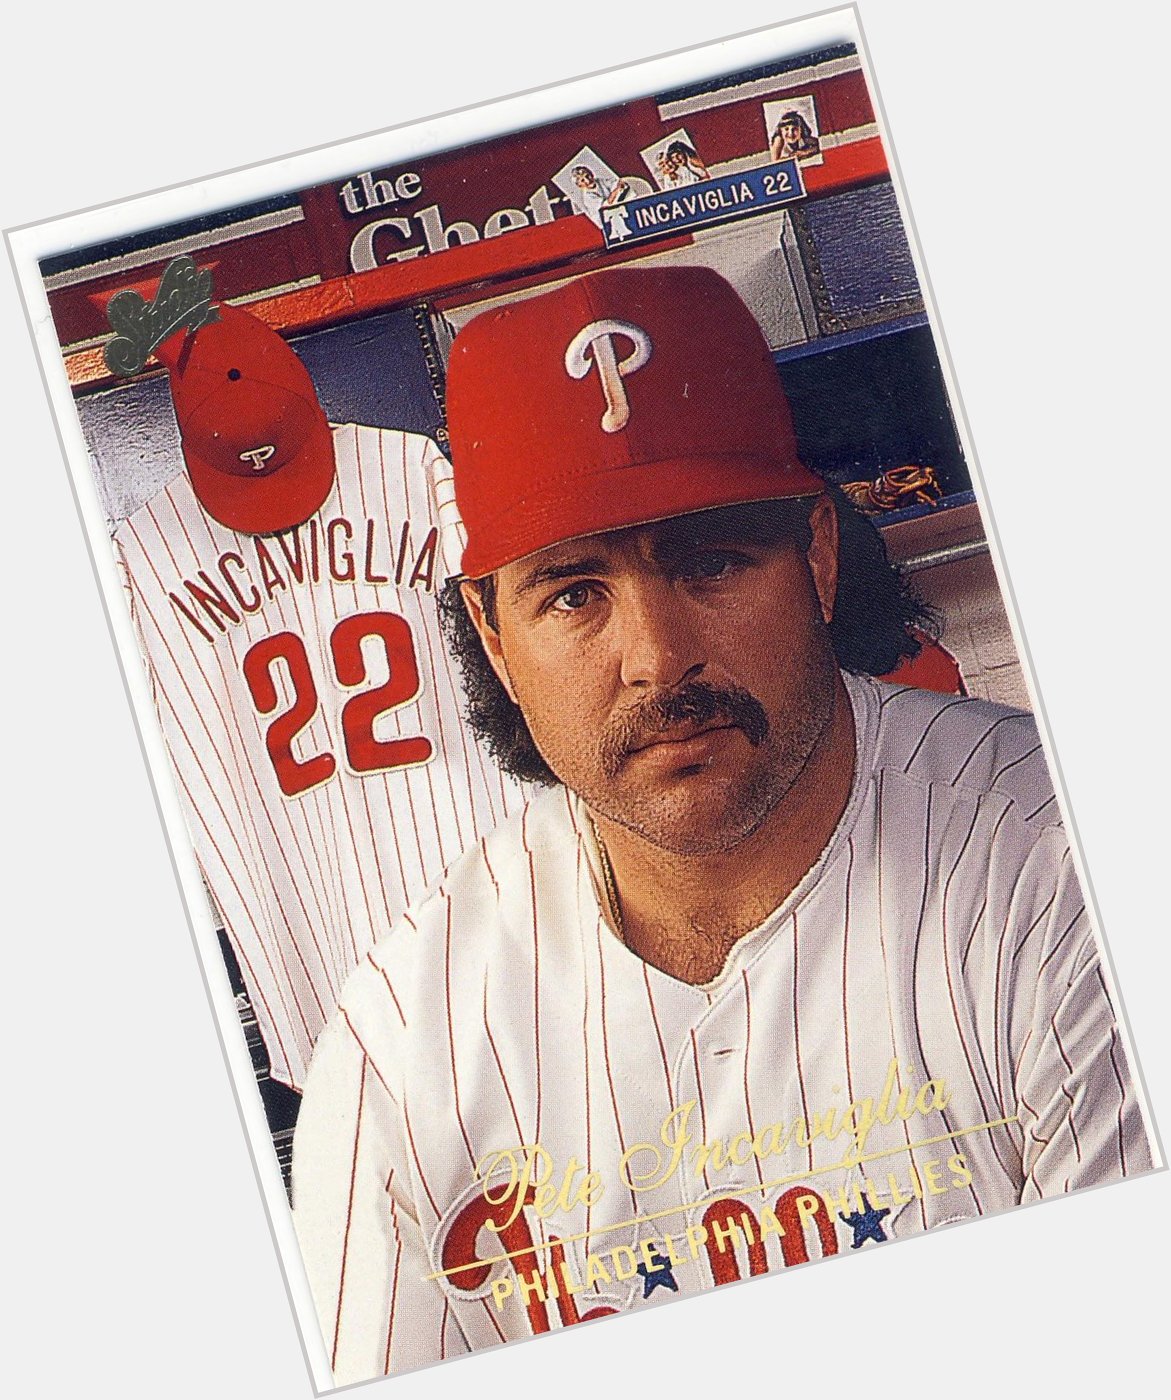 Happy 51st birthday to Pete Incaviglia! I made this website about him many, many years ago.  